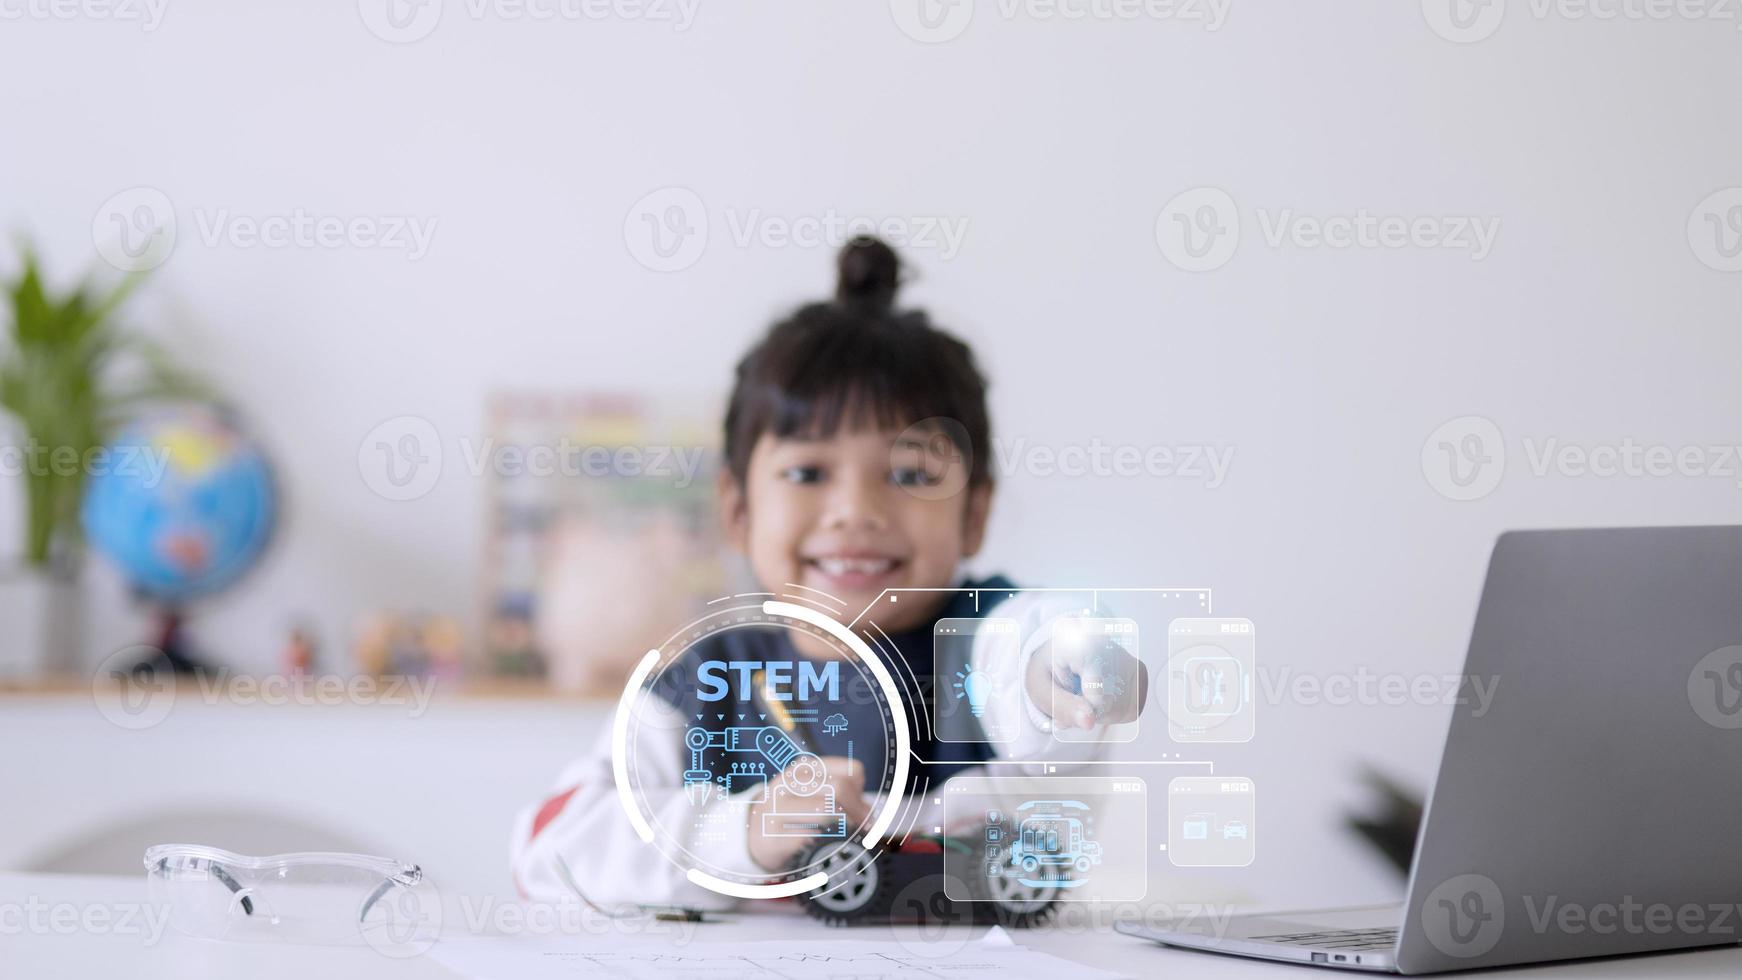 STEM school kids learning education technology building robot car creative ideas construction development programming analysis, graphical icons UI screen photo